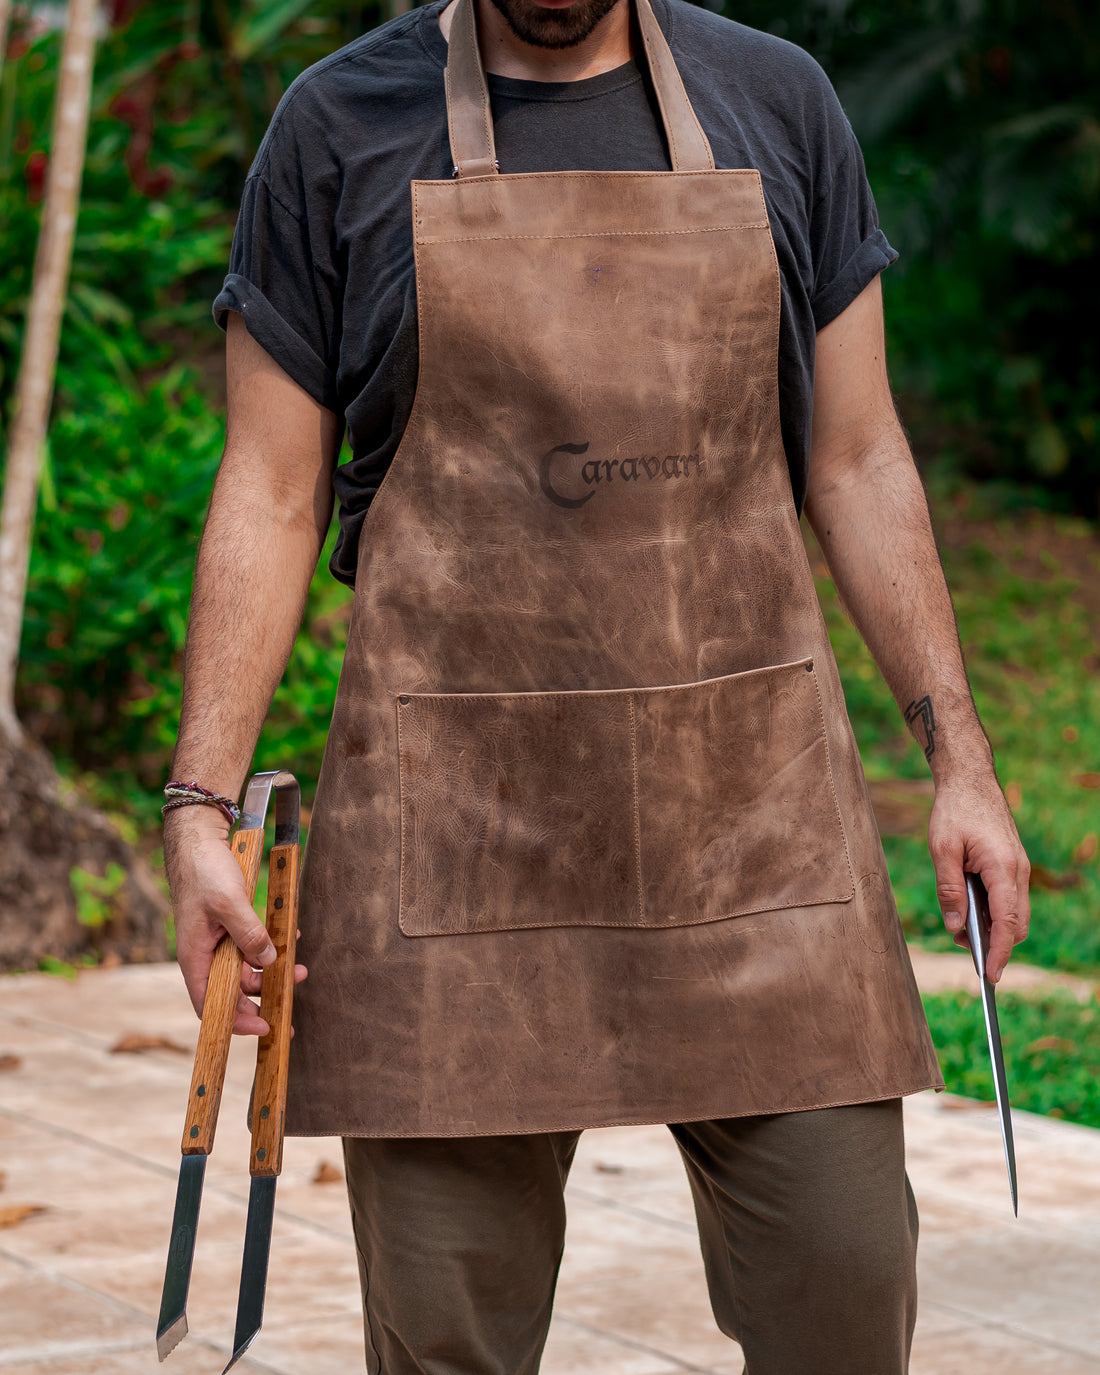 Mastering the Art of Grilling: A Leather Apron's Best Friend